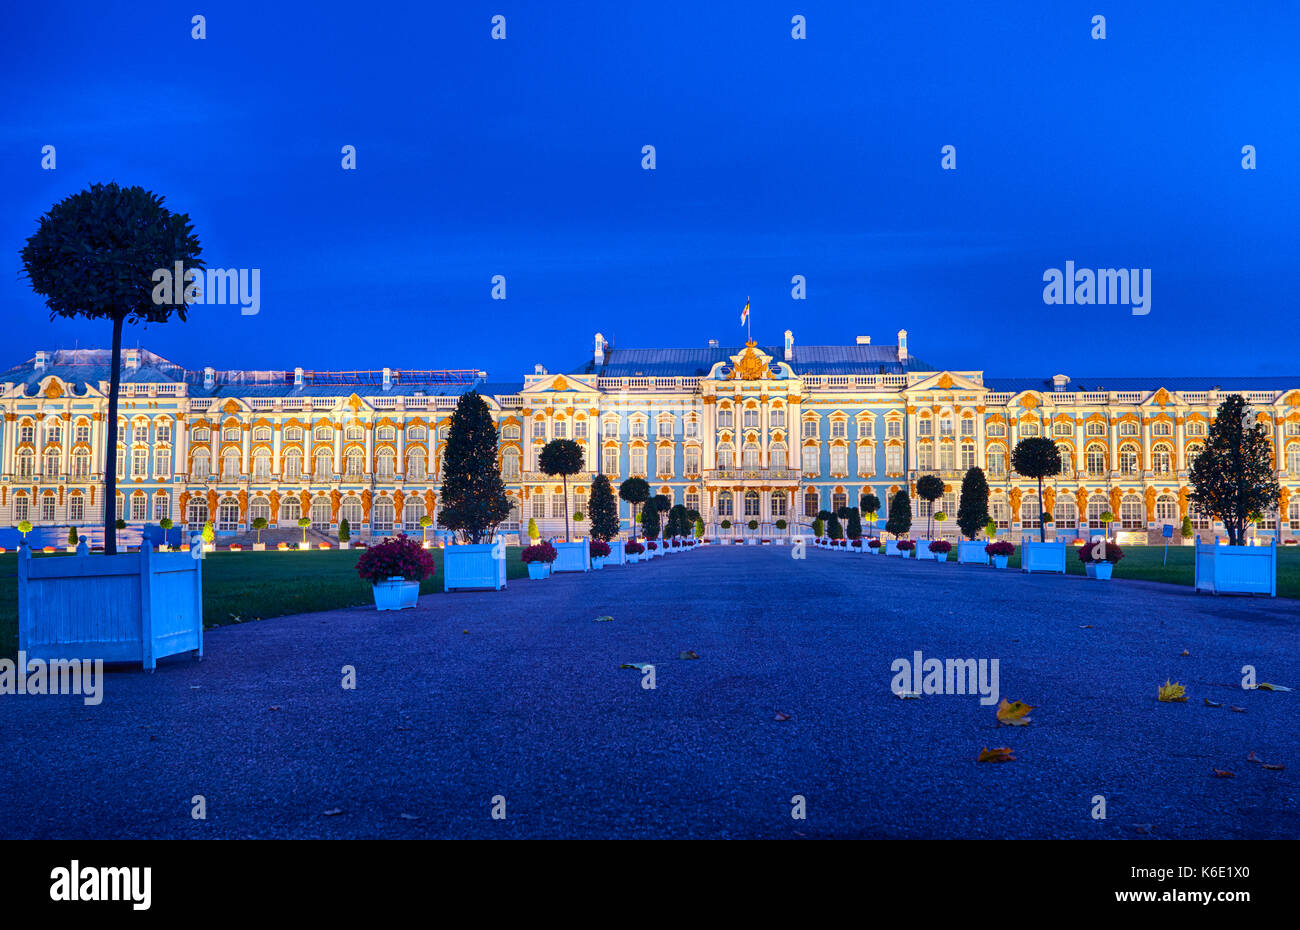 Late evening at Catherine Palace the summer residence of the Russian tsars at Pushkin, Saint-Petersburg. Square and trees Stock Photo